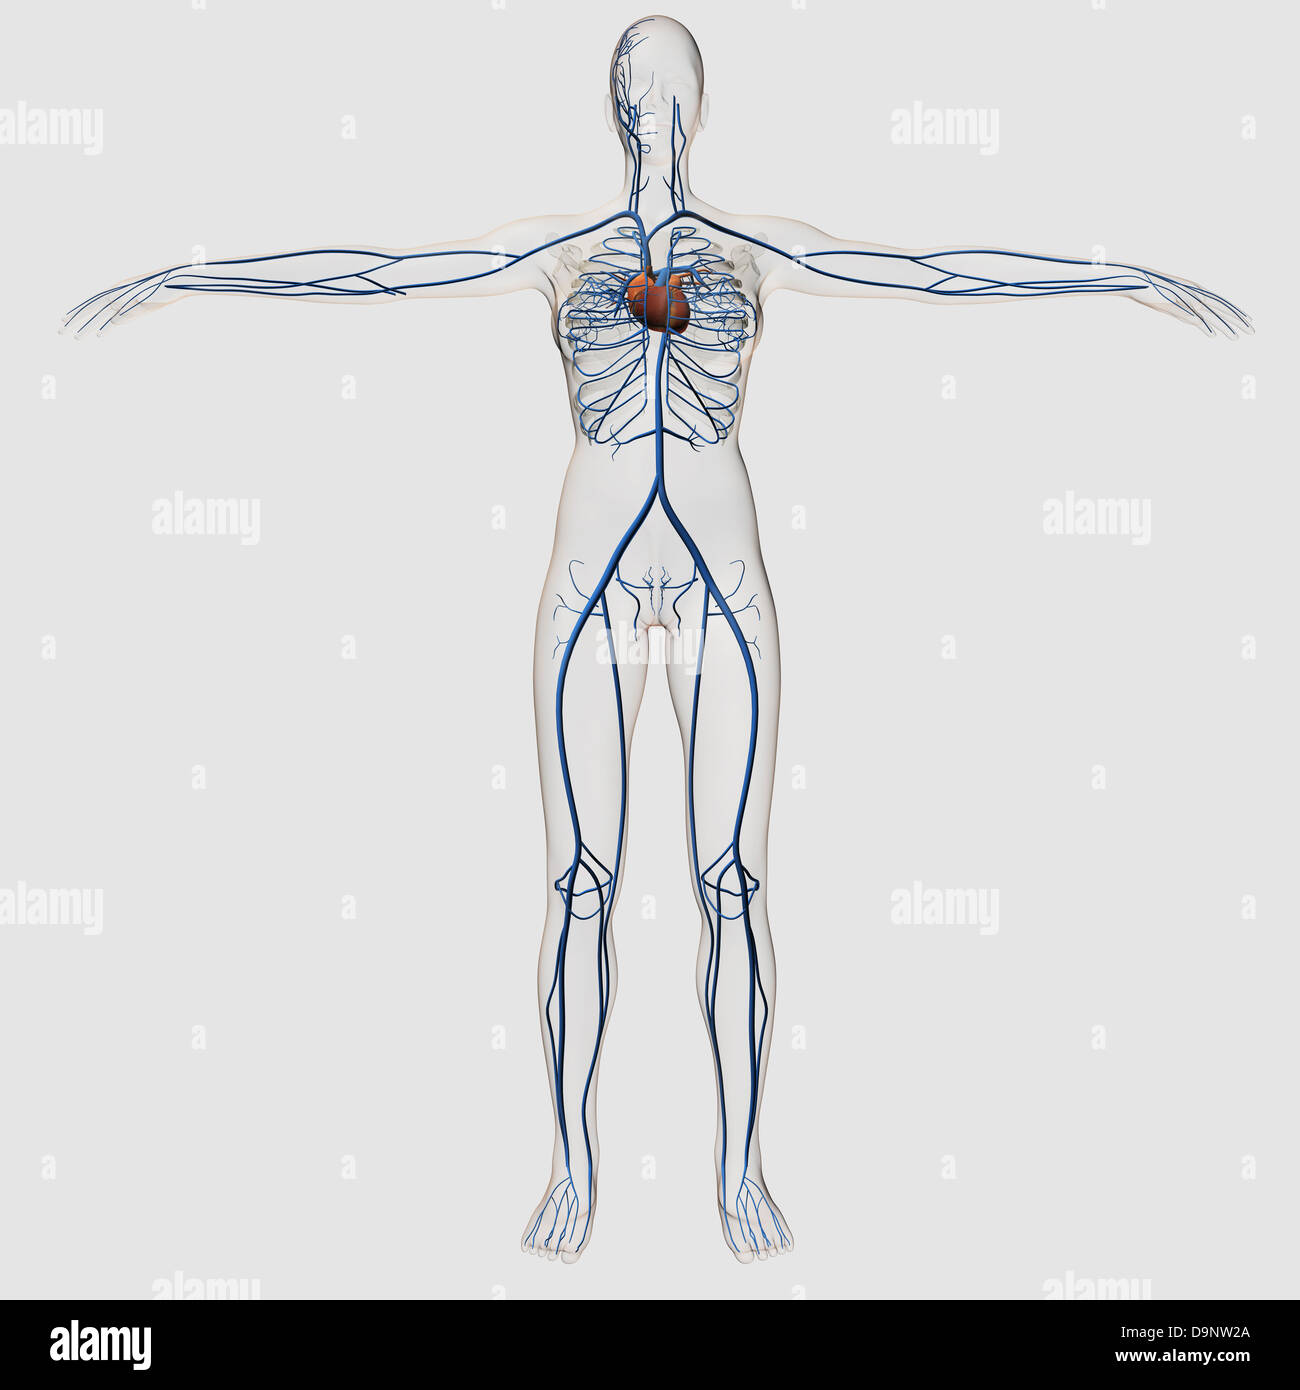 Medical illustration of female circulatory system with heart and veins visible, full body view. Stock Photo